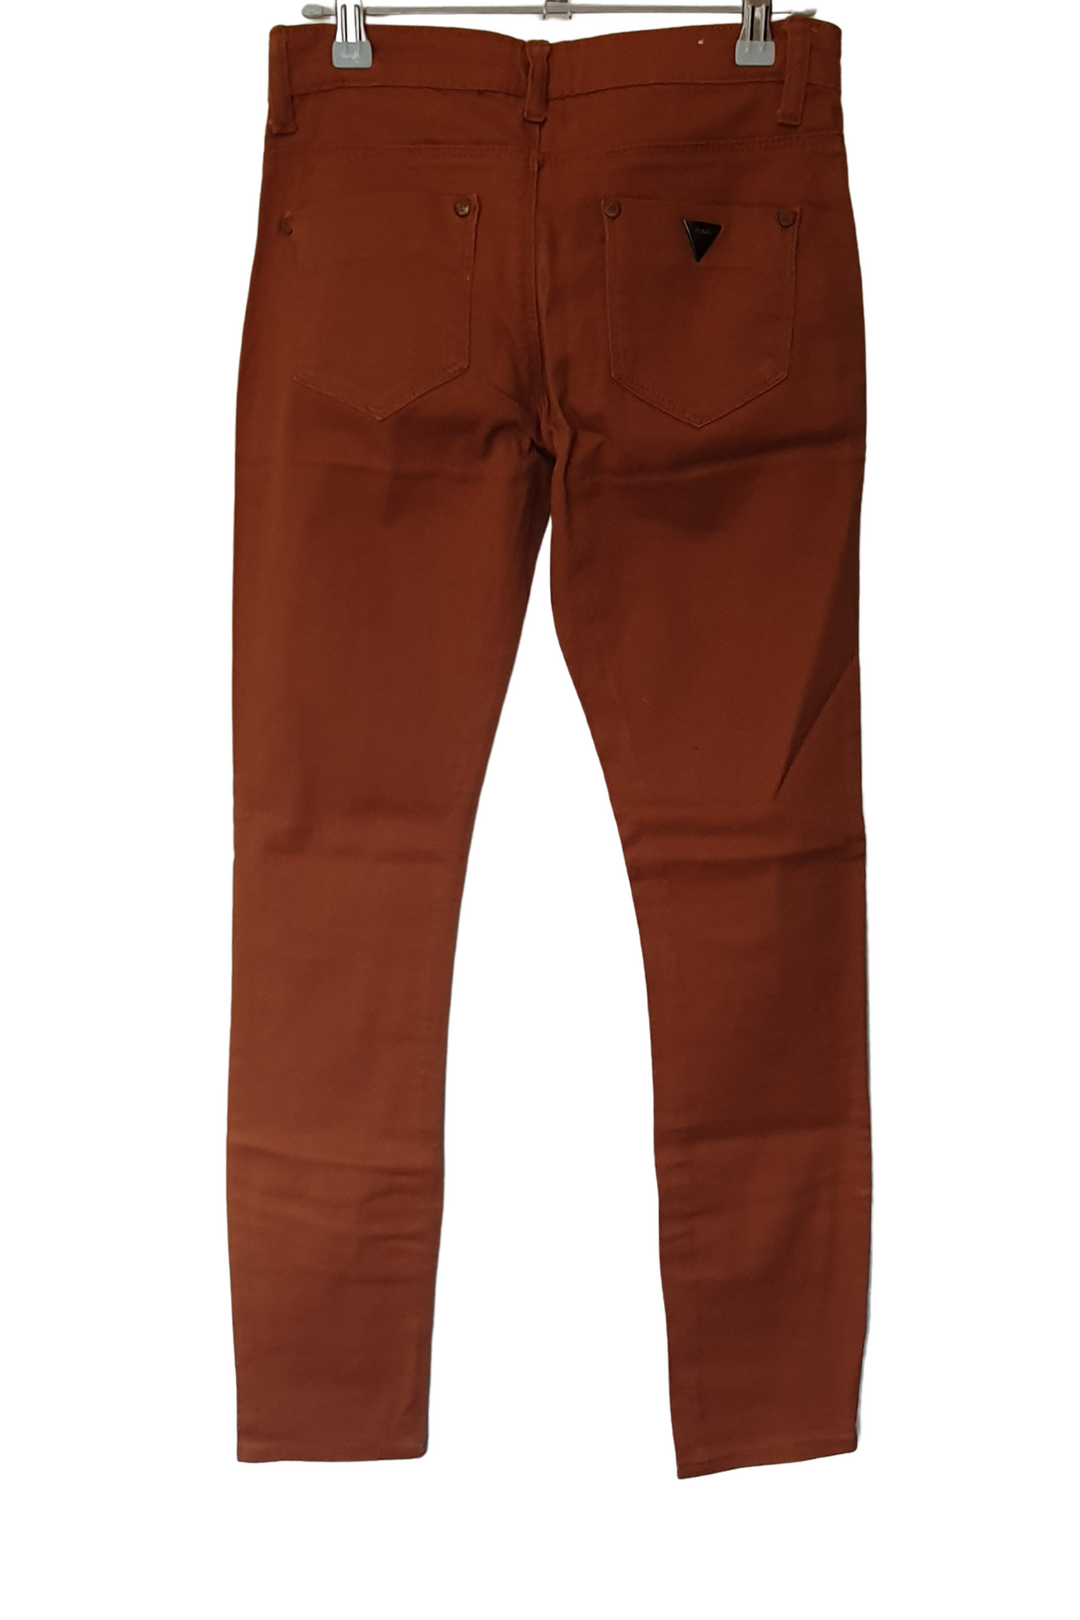 RUST BROWN SOFT JEANS